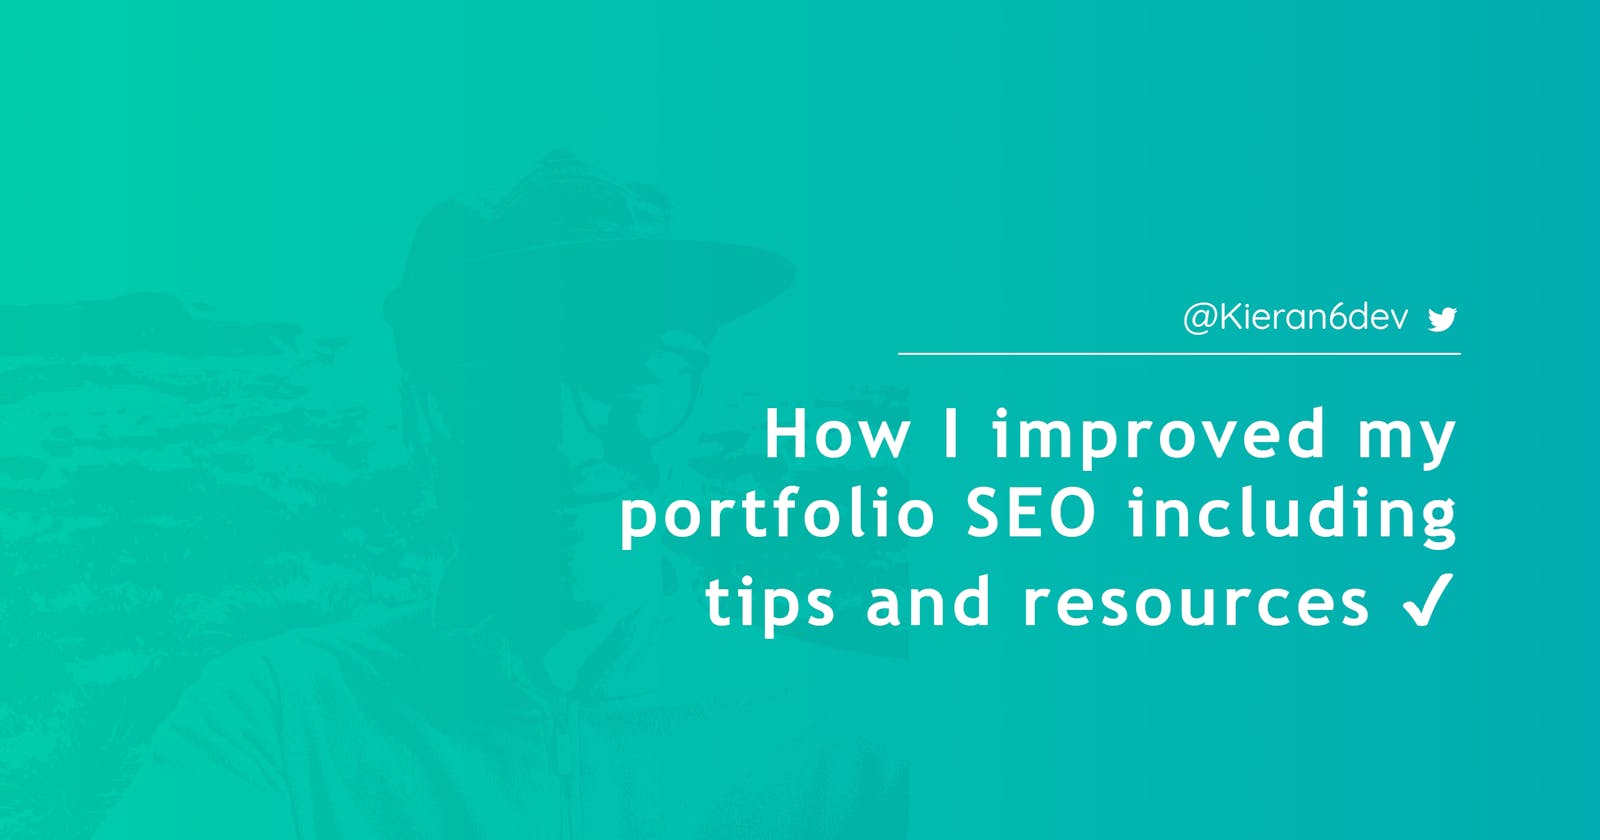 How I improved my portfolio SEO including tips and resources